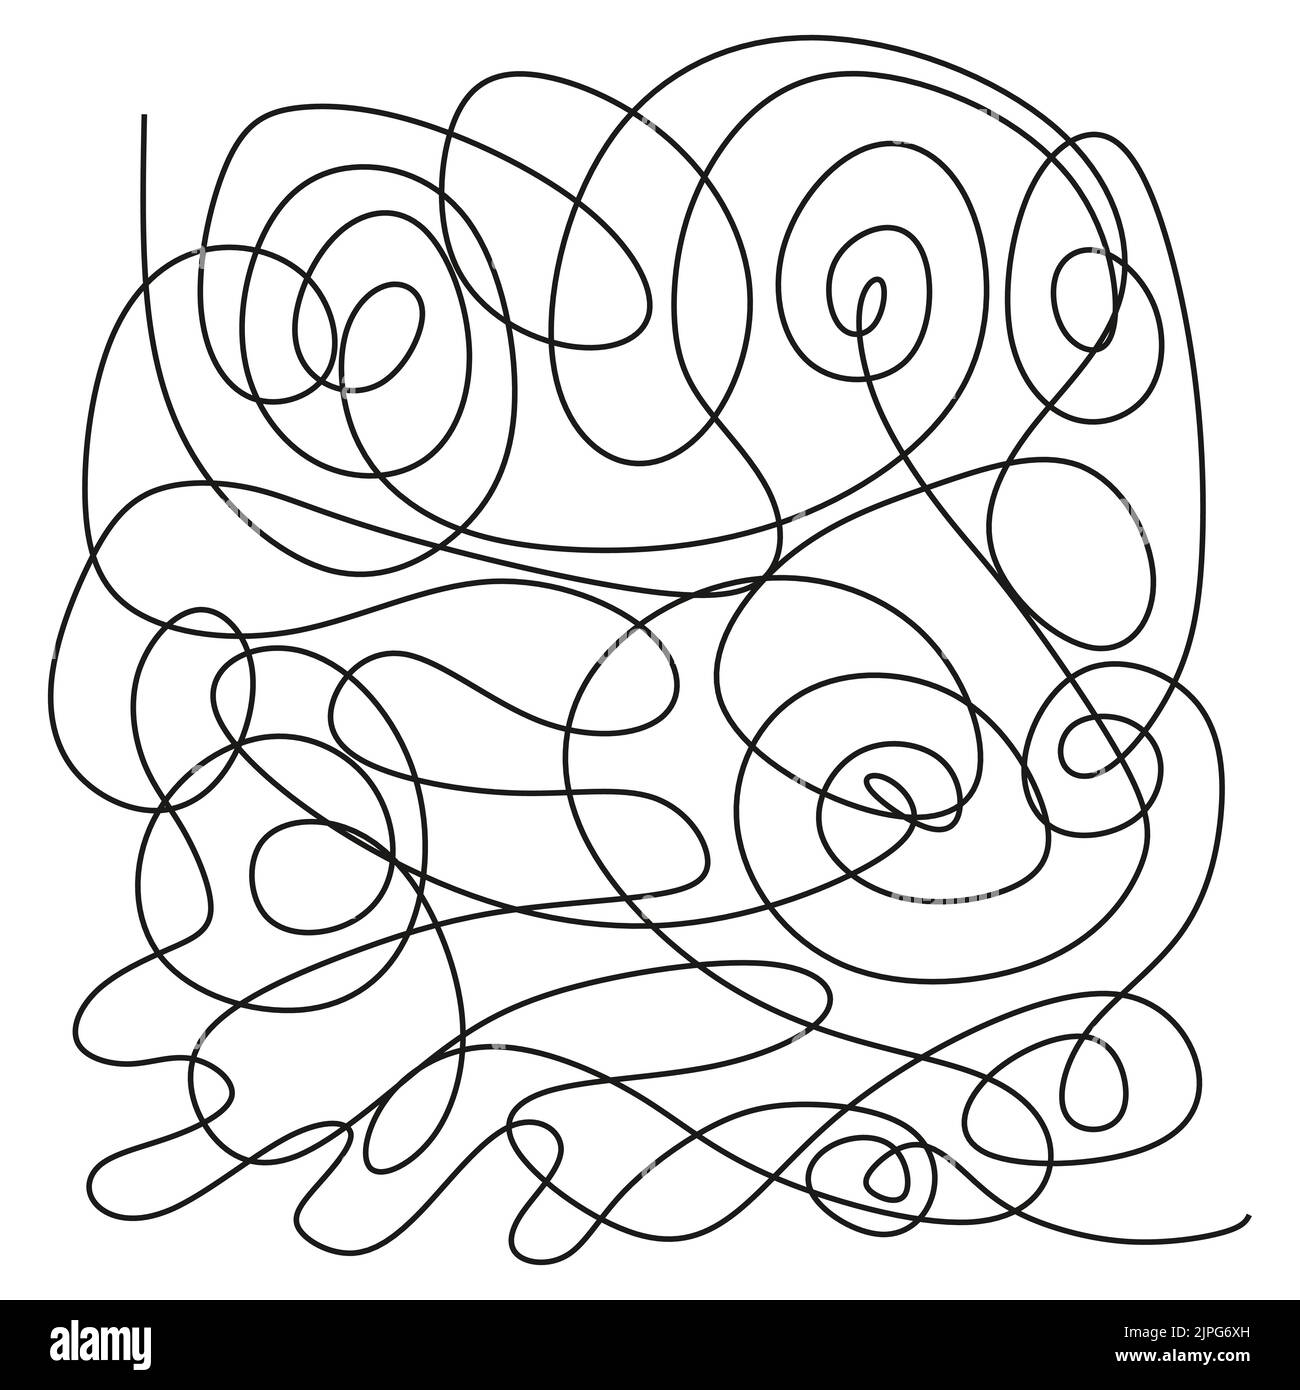 Hand drawn doodle scribble chaos path messy lines Stock Vector